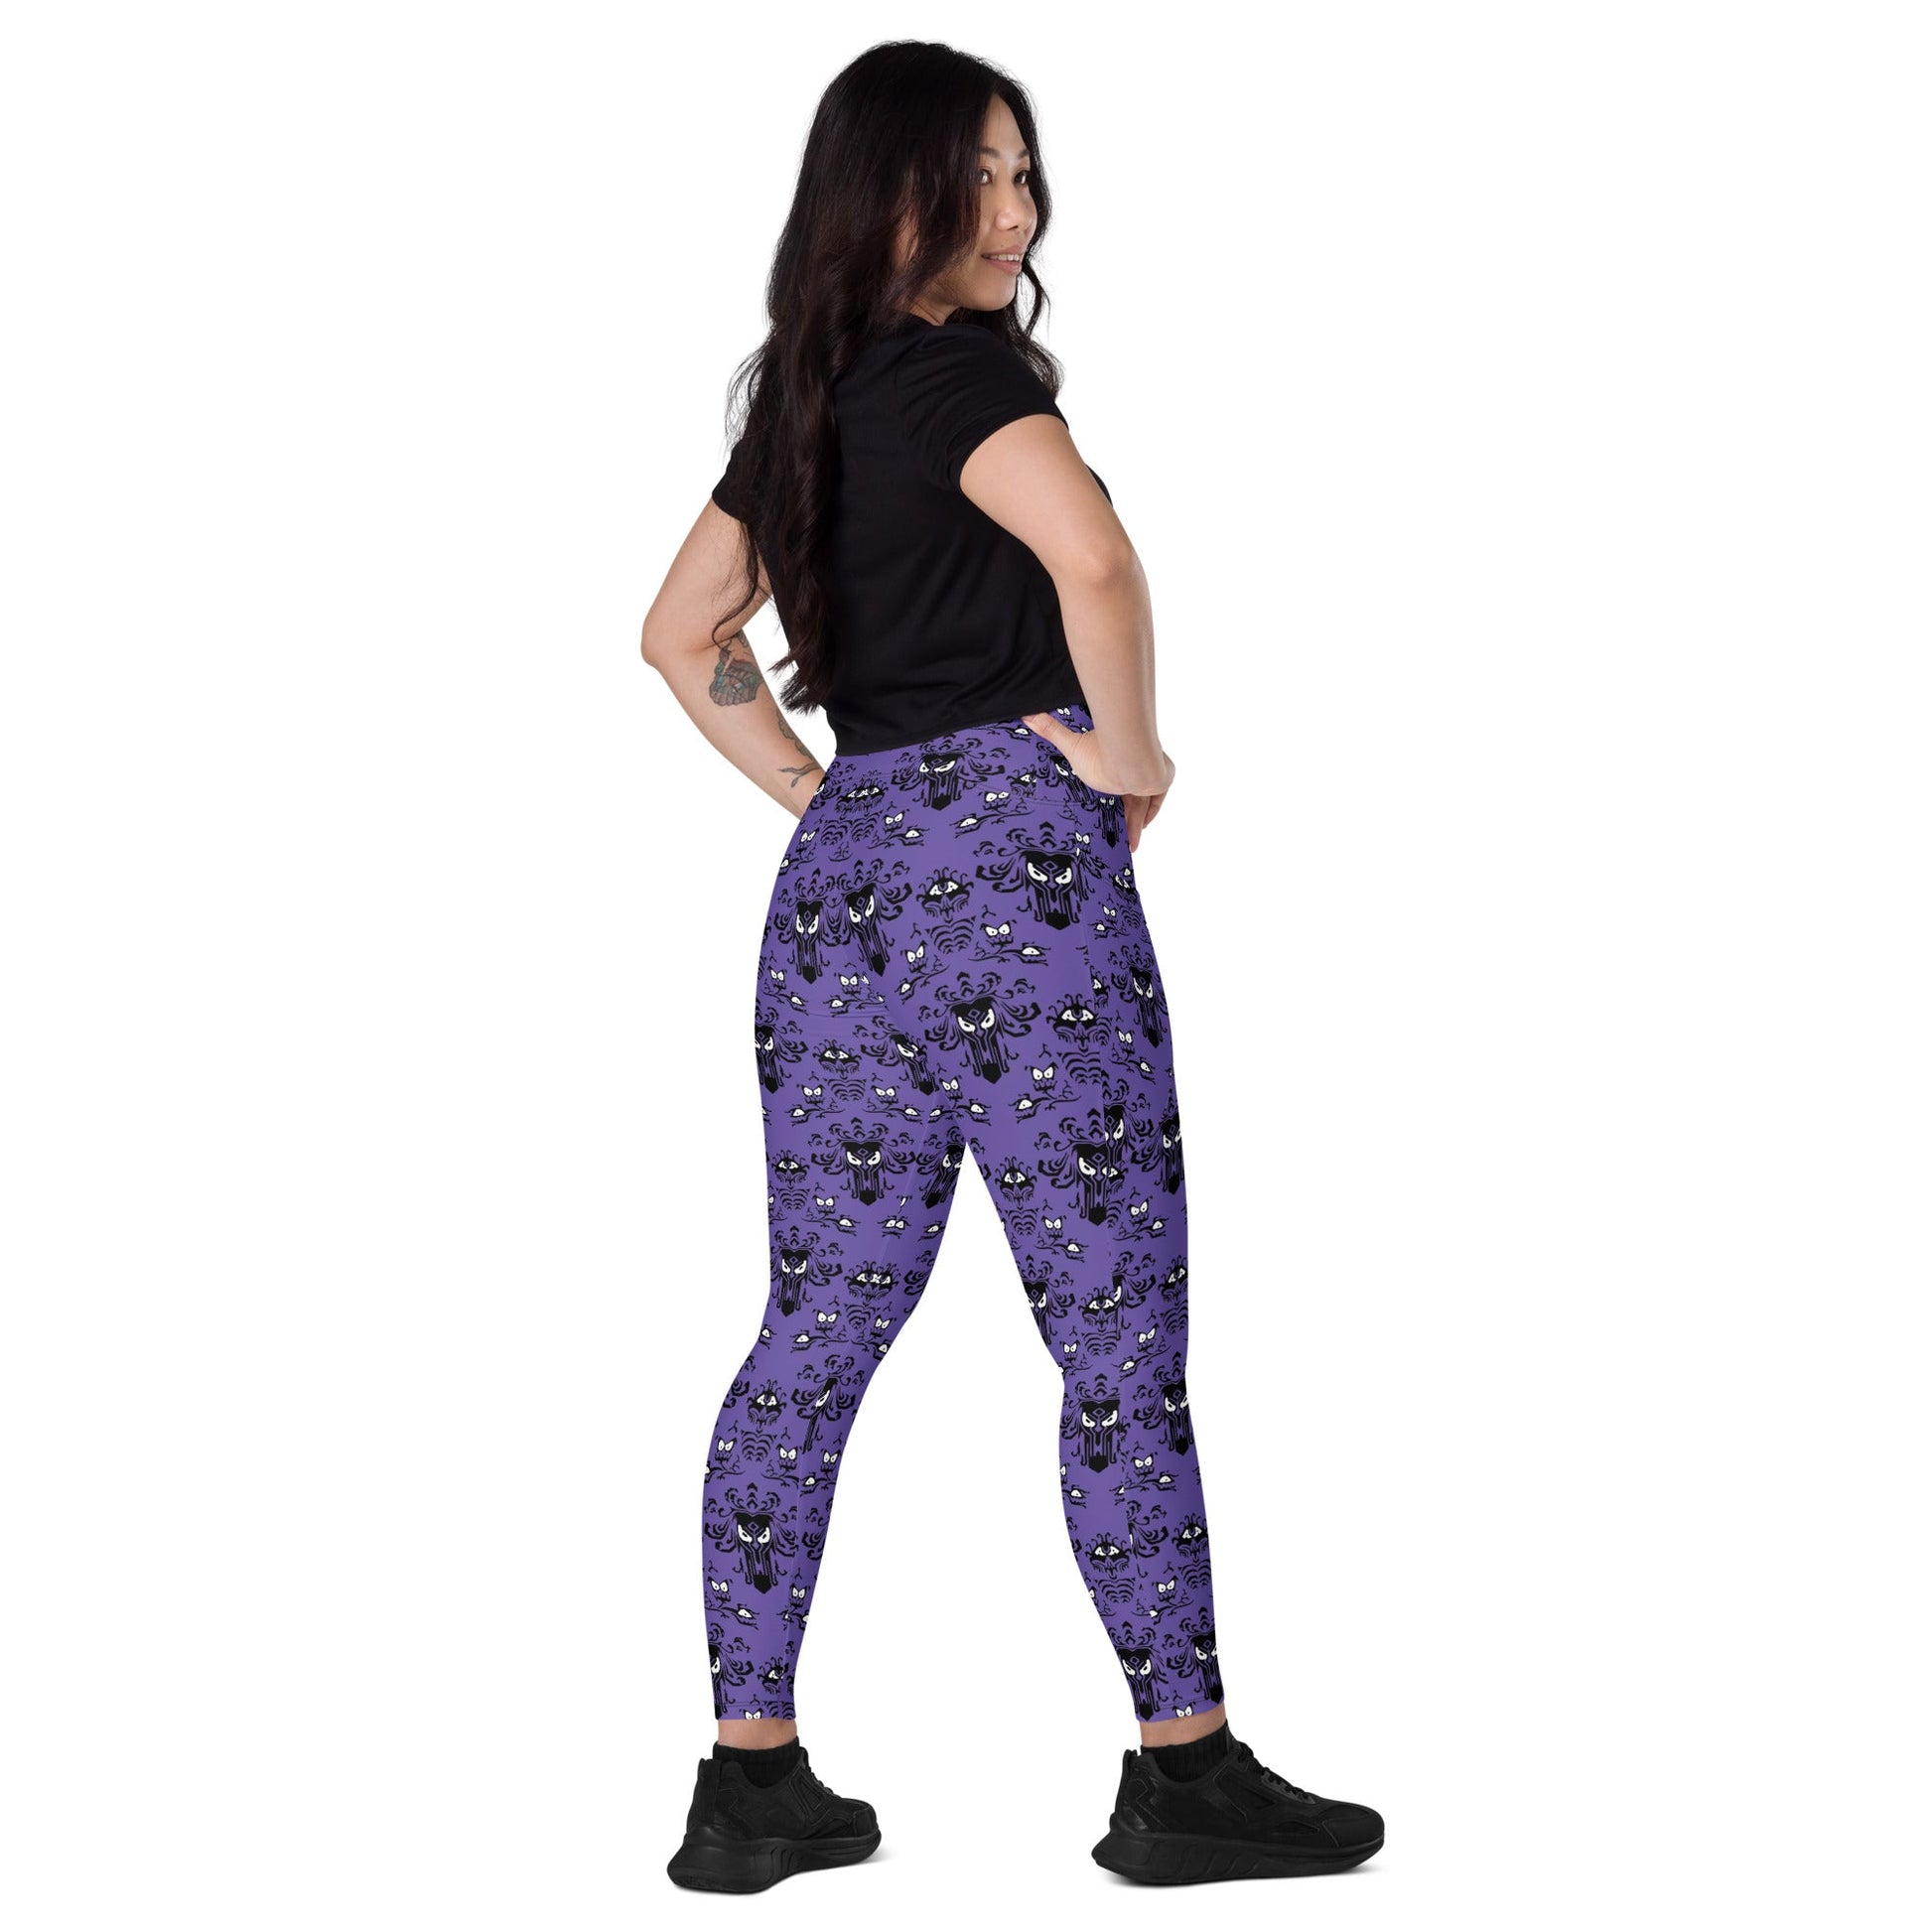 Haunted House Leggings with pockets active wearboo to youcosplay#tag4##tag5##tag6#